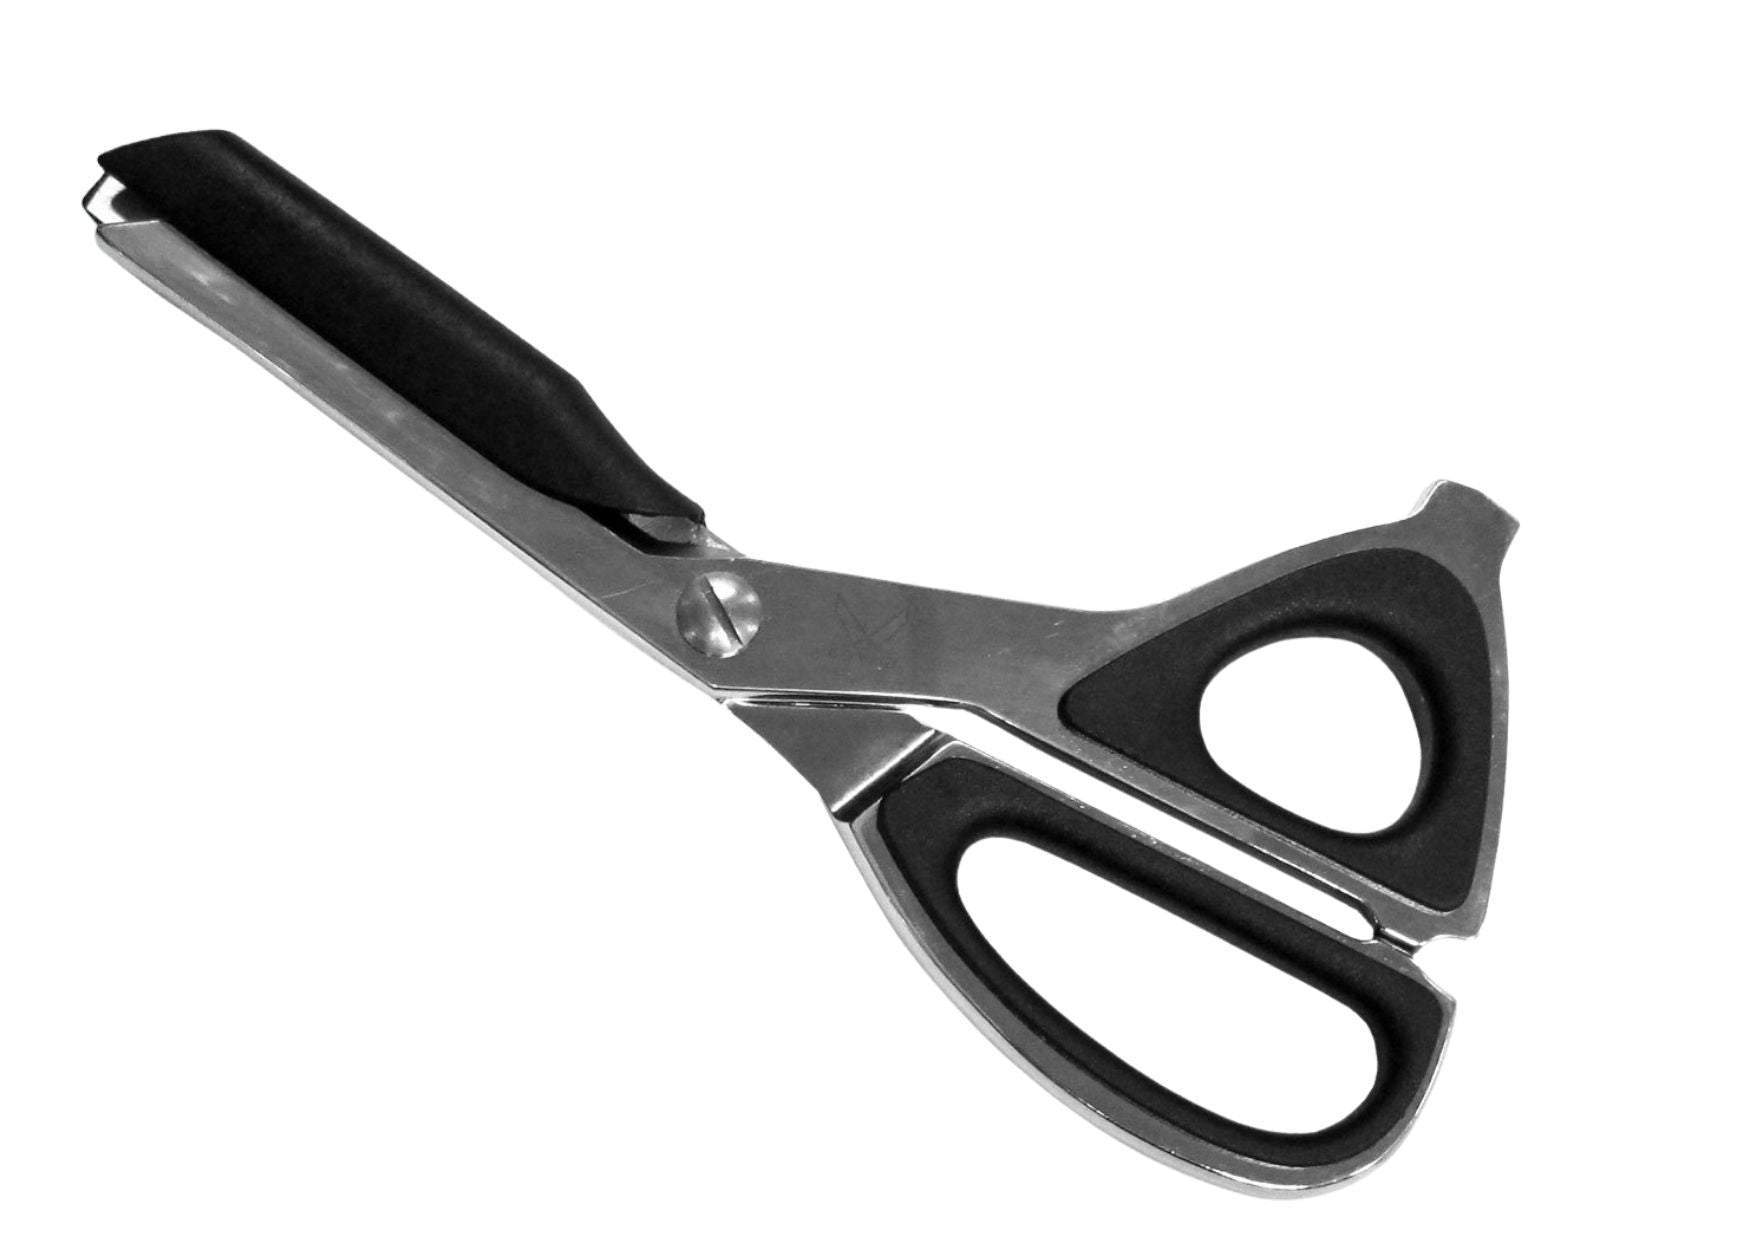 Lavabis multifunction rescue shears stainless steel - 0